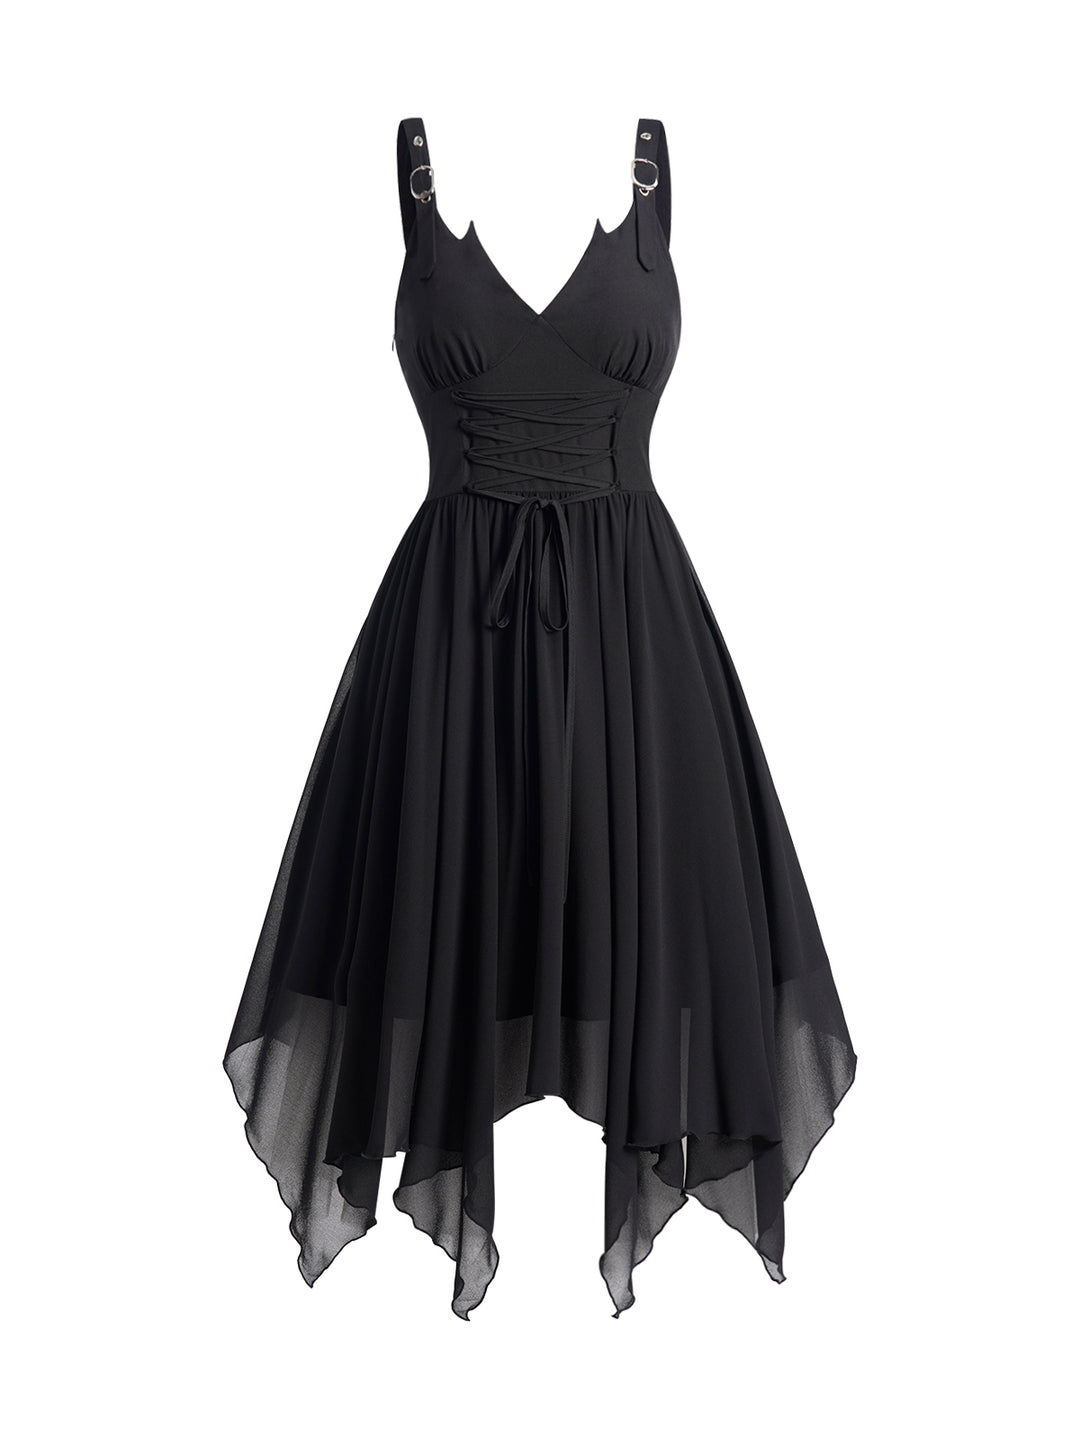 Lace Up Handkerchief Adjustable Buckle Strap Gothic Style Dress